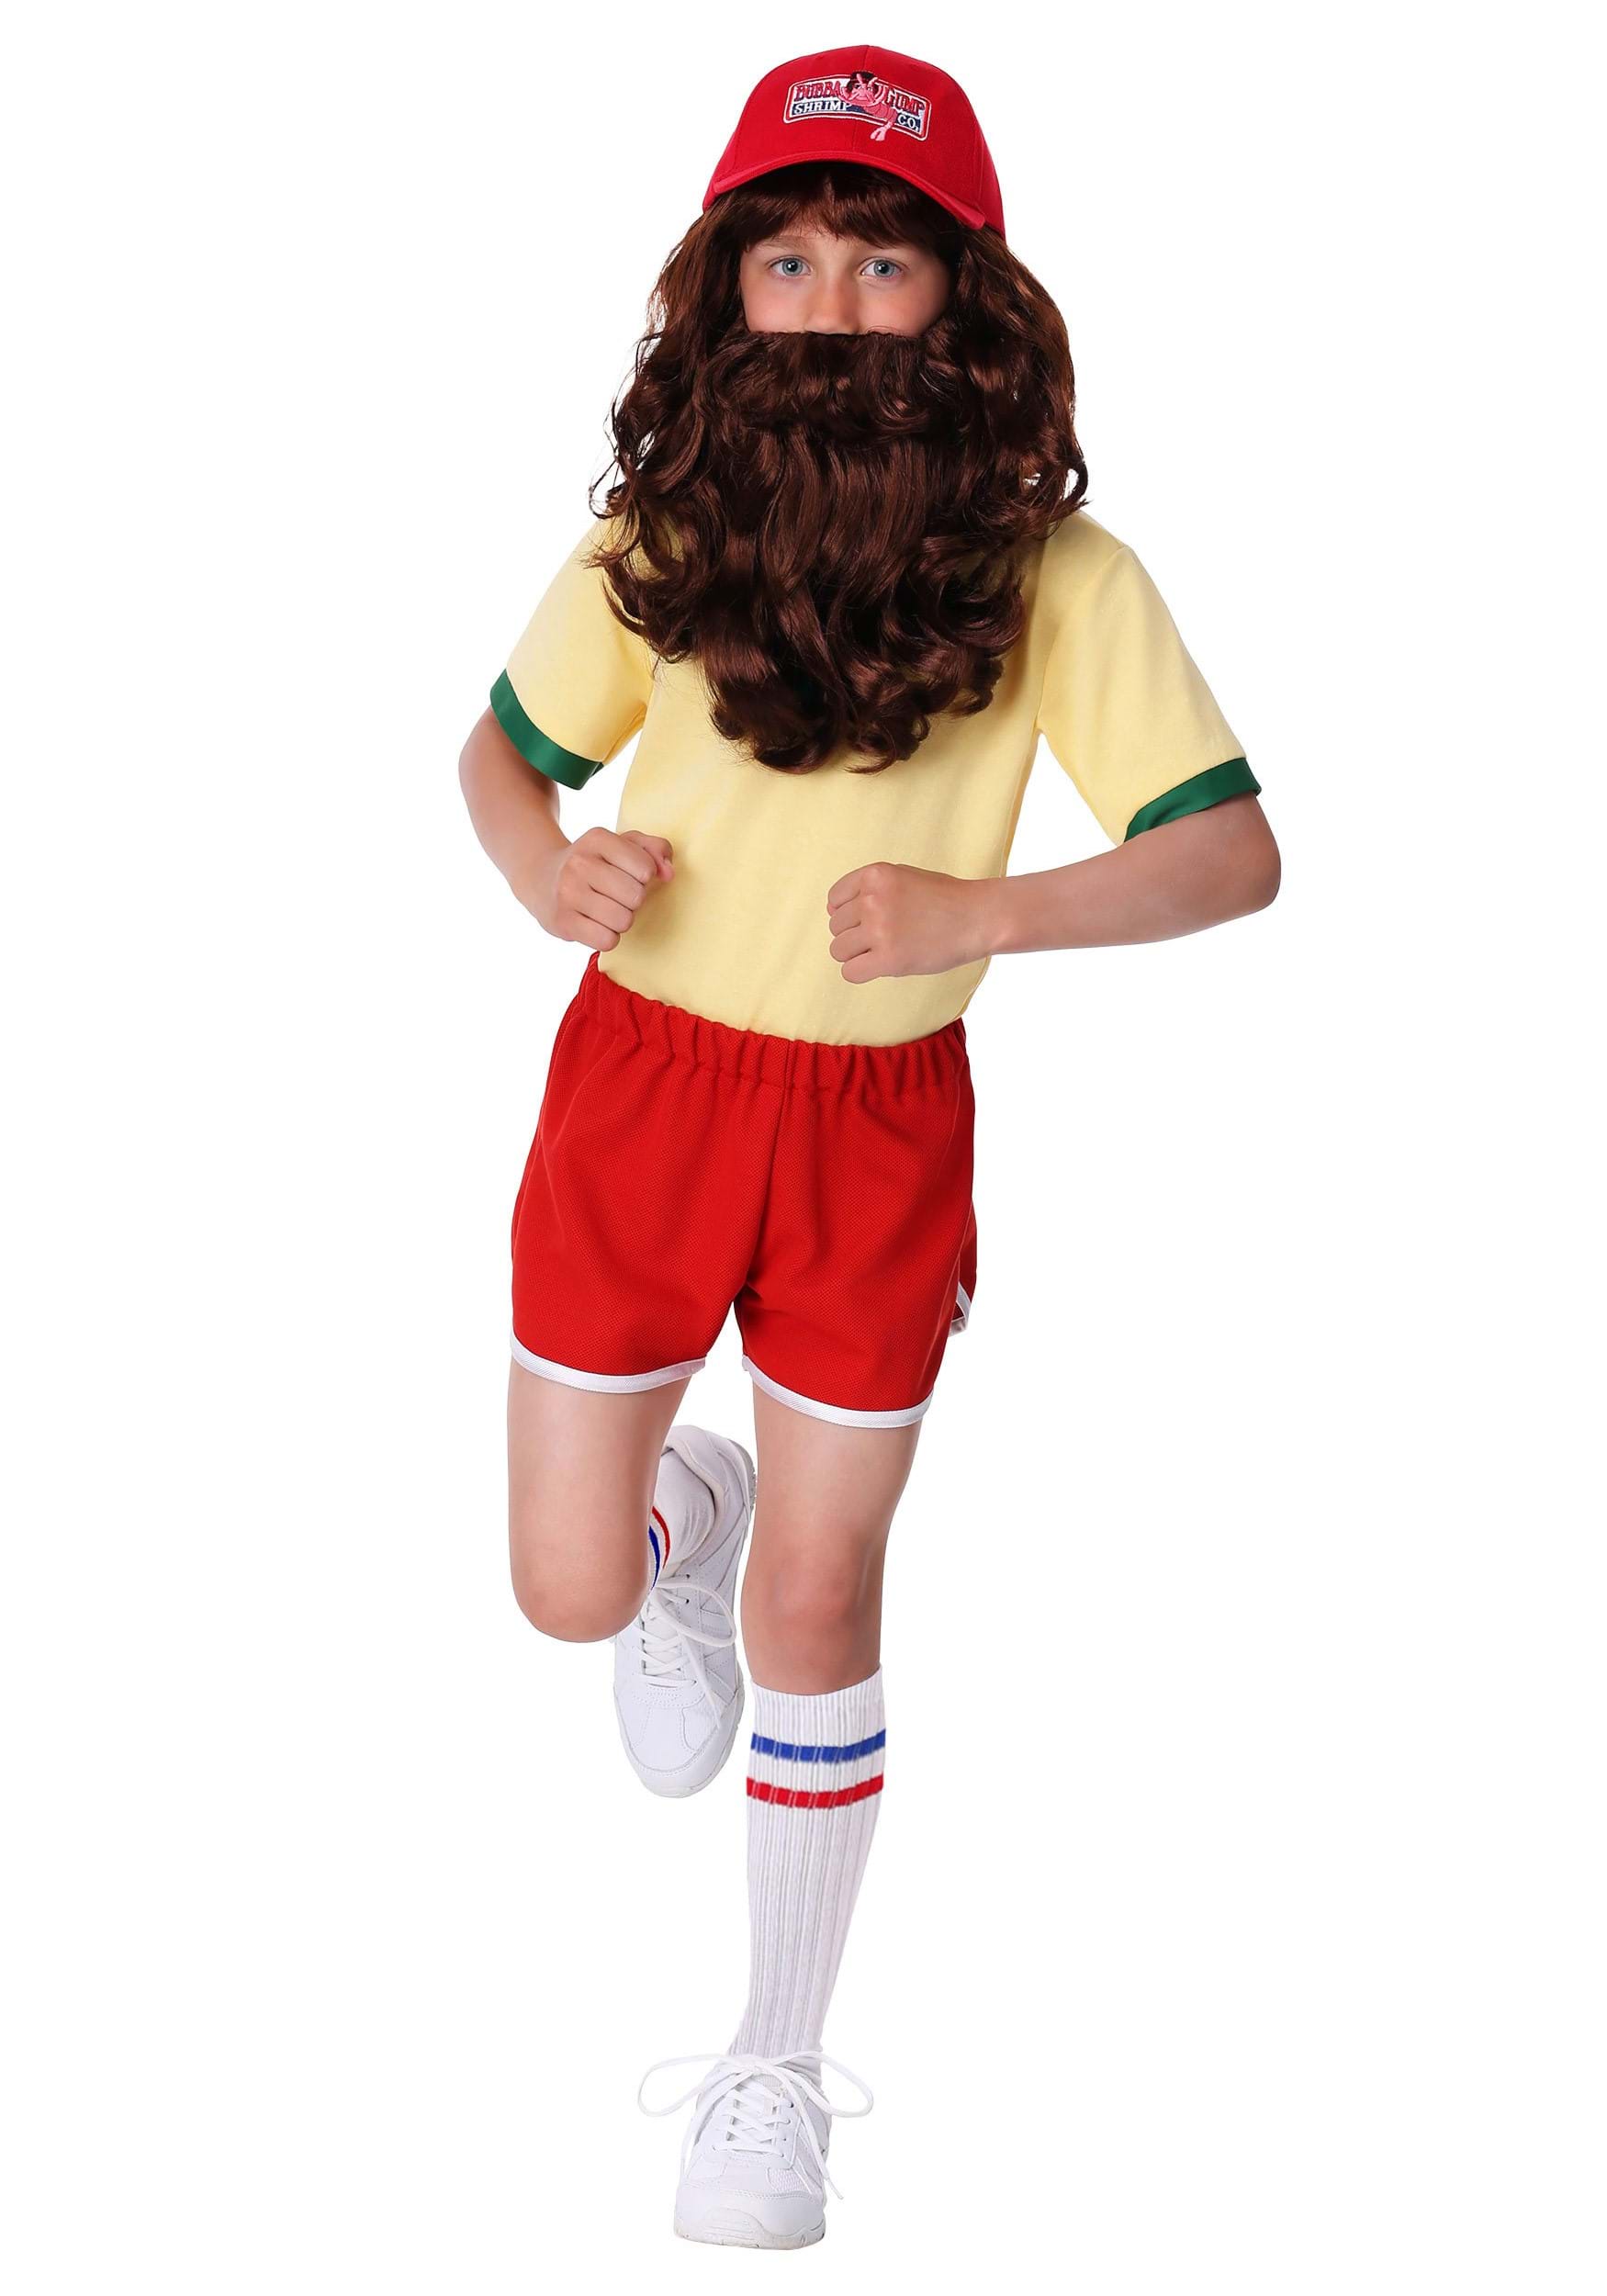 Photos - Fancy Dress FUN Costumes Kid's Forrest Gump Running Costume Yellow/Red GUM6020CH